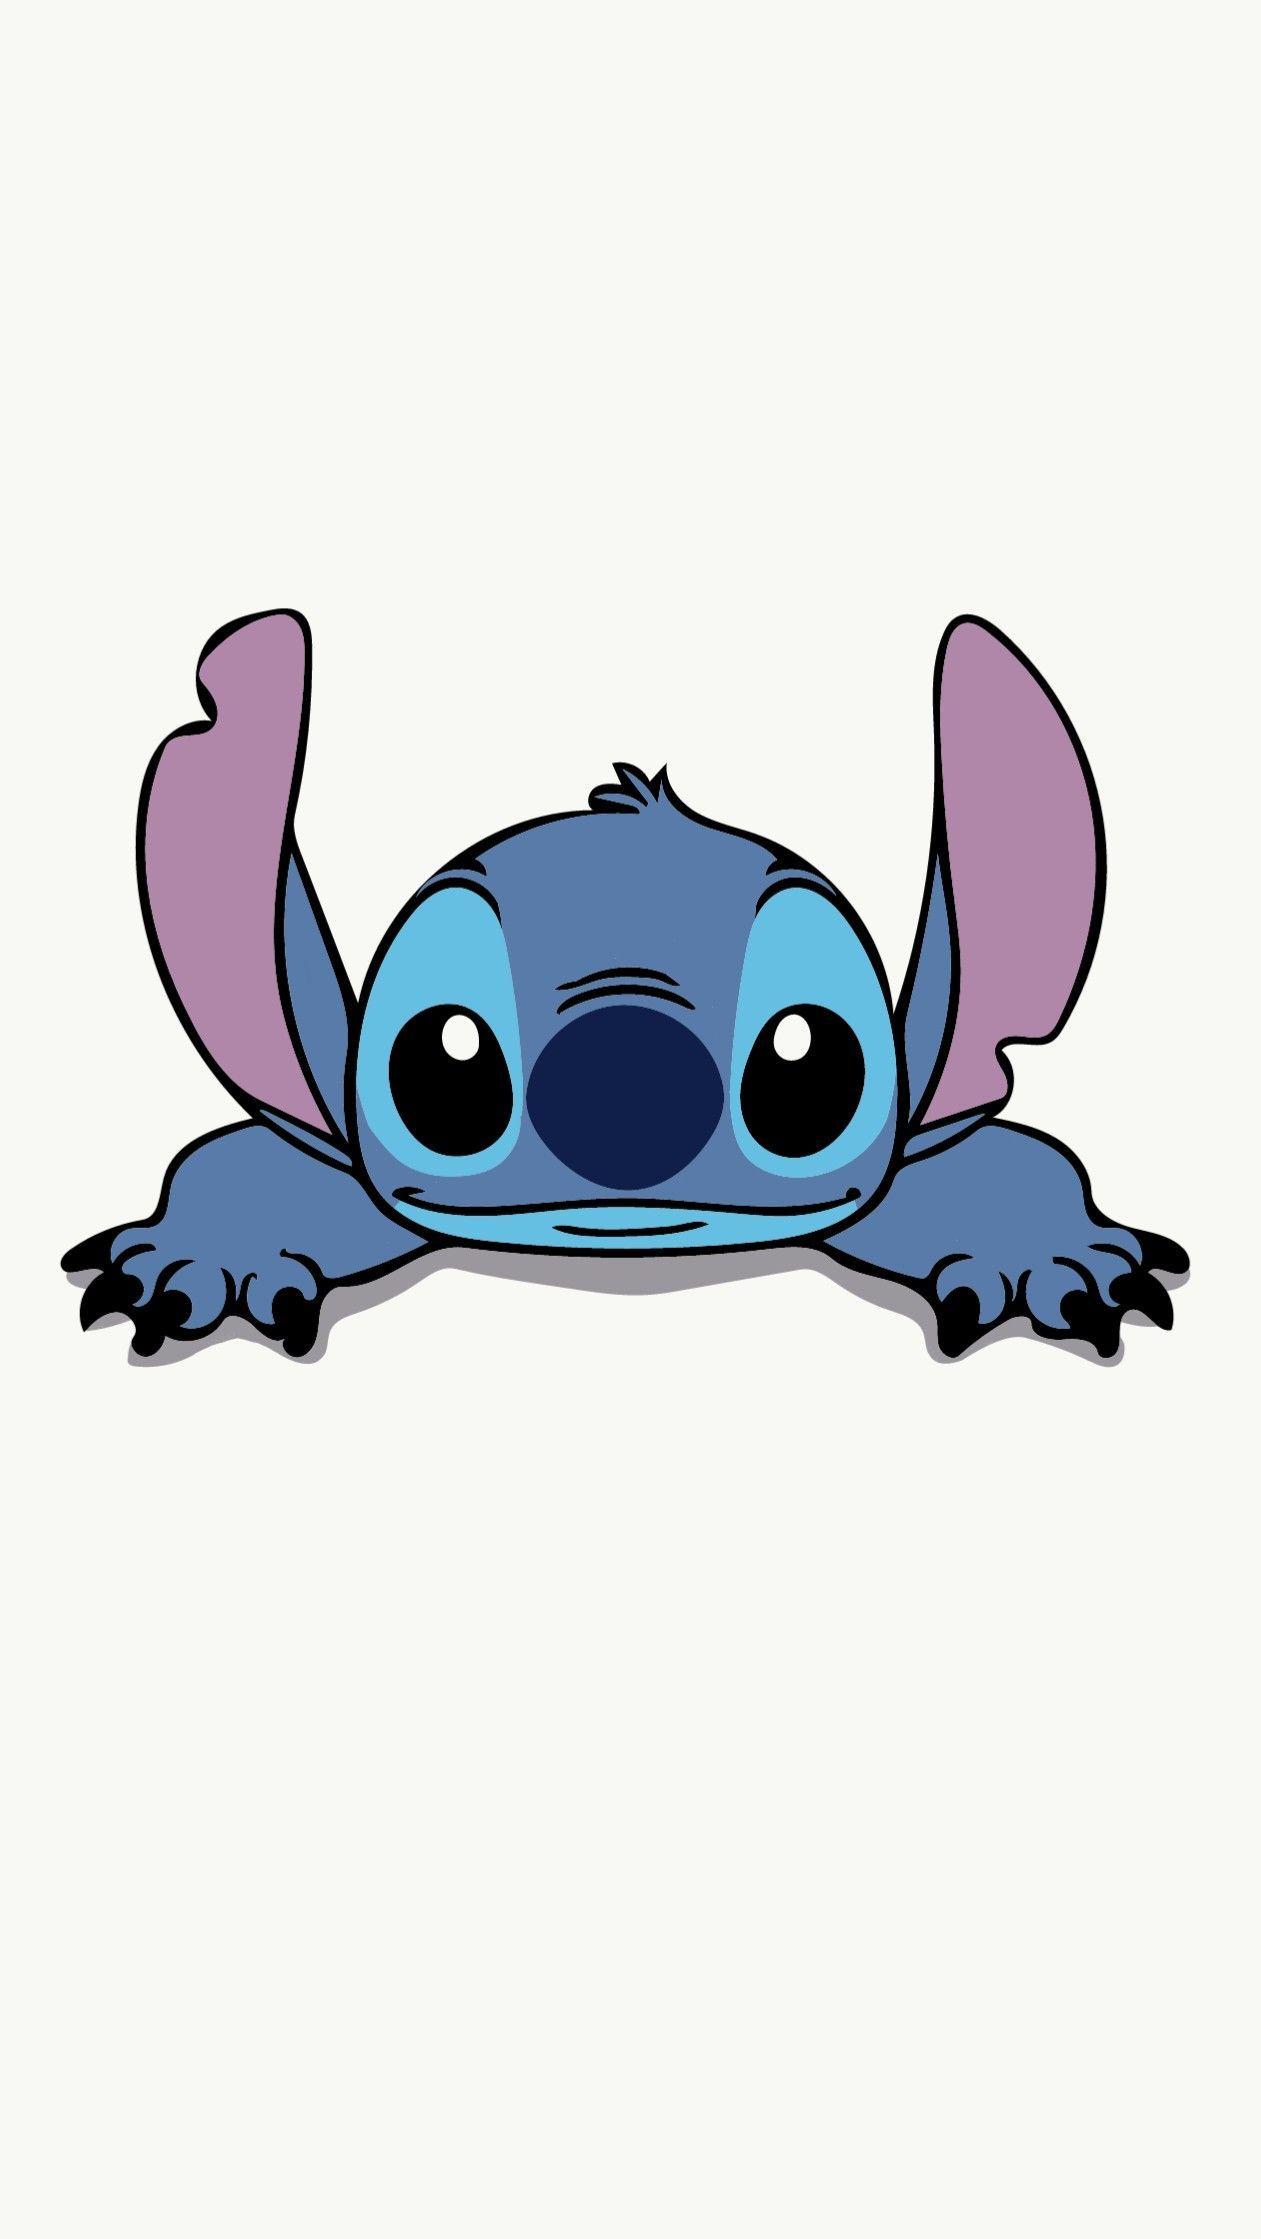 Adorable Stitch Wallpapers - Top Free Adorable Stitch Backgrounds ...